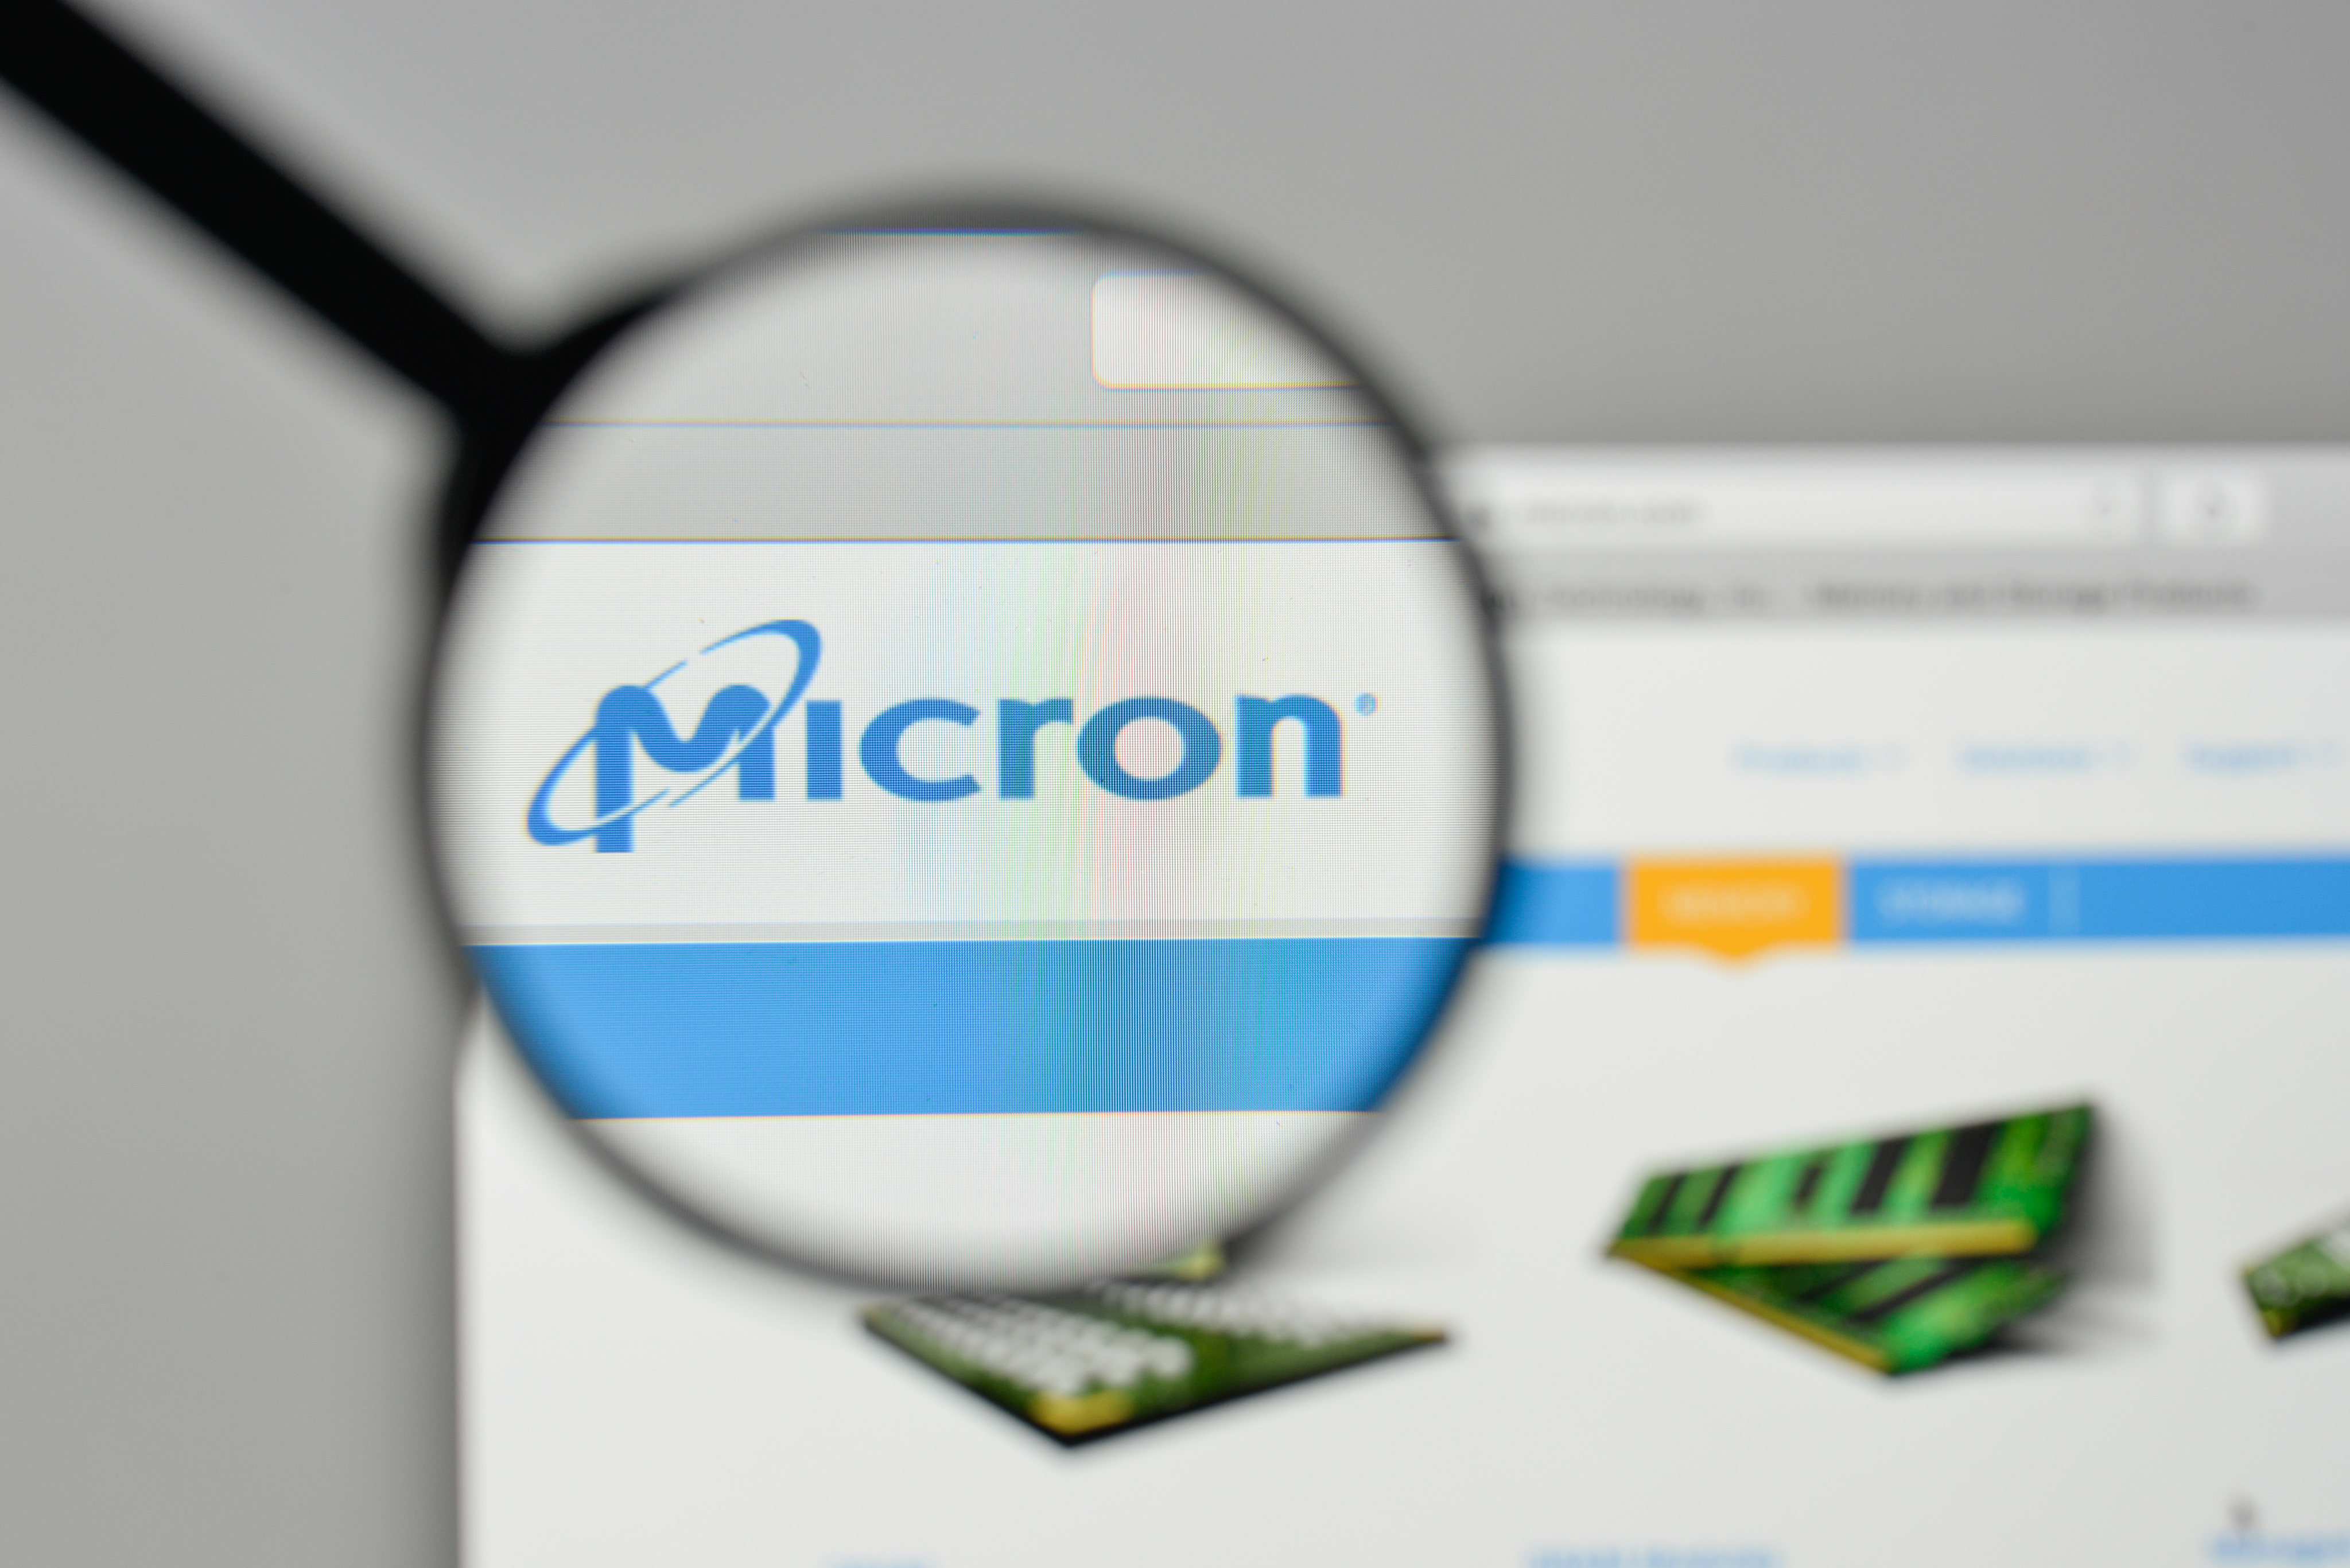 US memory chip maker Micron Technology is the first foreign semiconductor company to be put under a cybersecurity review by China. Photo: Shutterstock